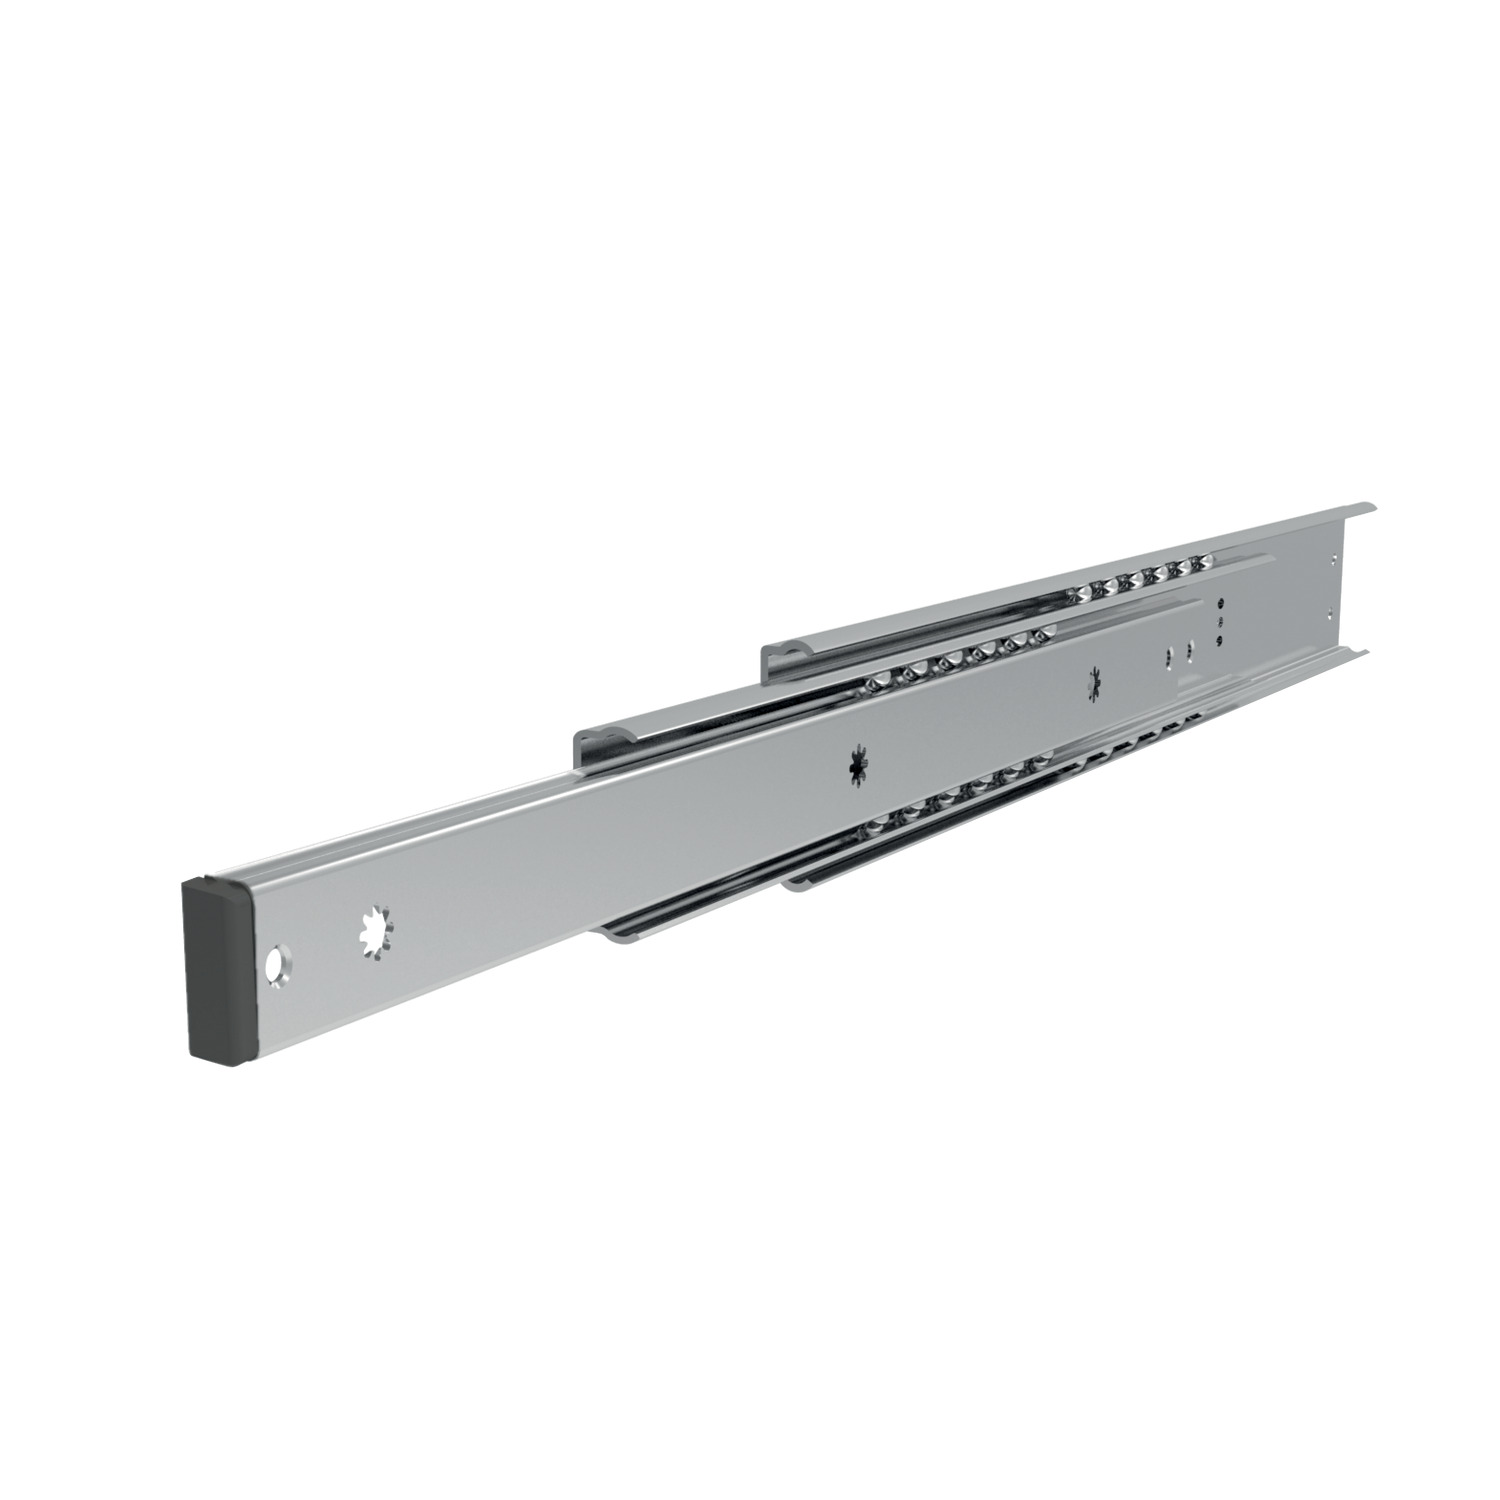 Soft-Close Drawer Slide Galvanized steel soft-close drawer slides, loads up to 30Kg per pair. Soft close over last 50mm. For smooth full retraction to closed position.